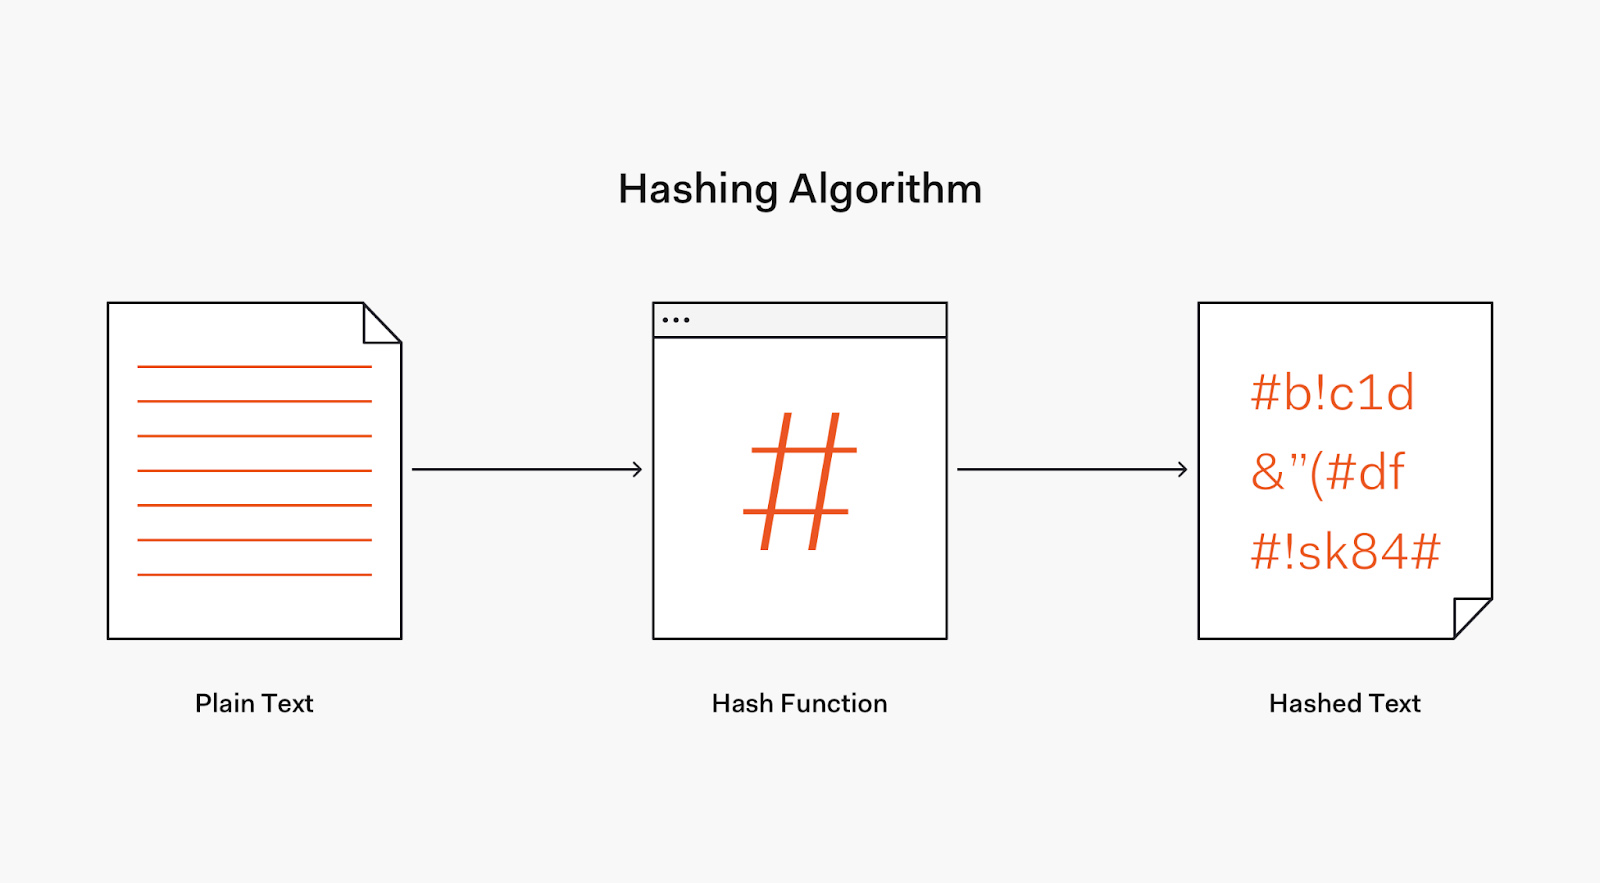 The Hashing Algorithm converts a plaintext password into hashed text.